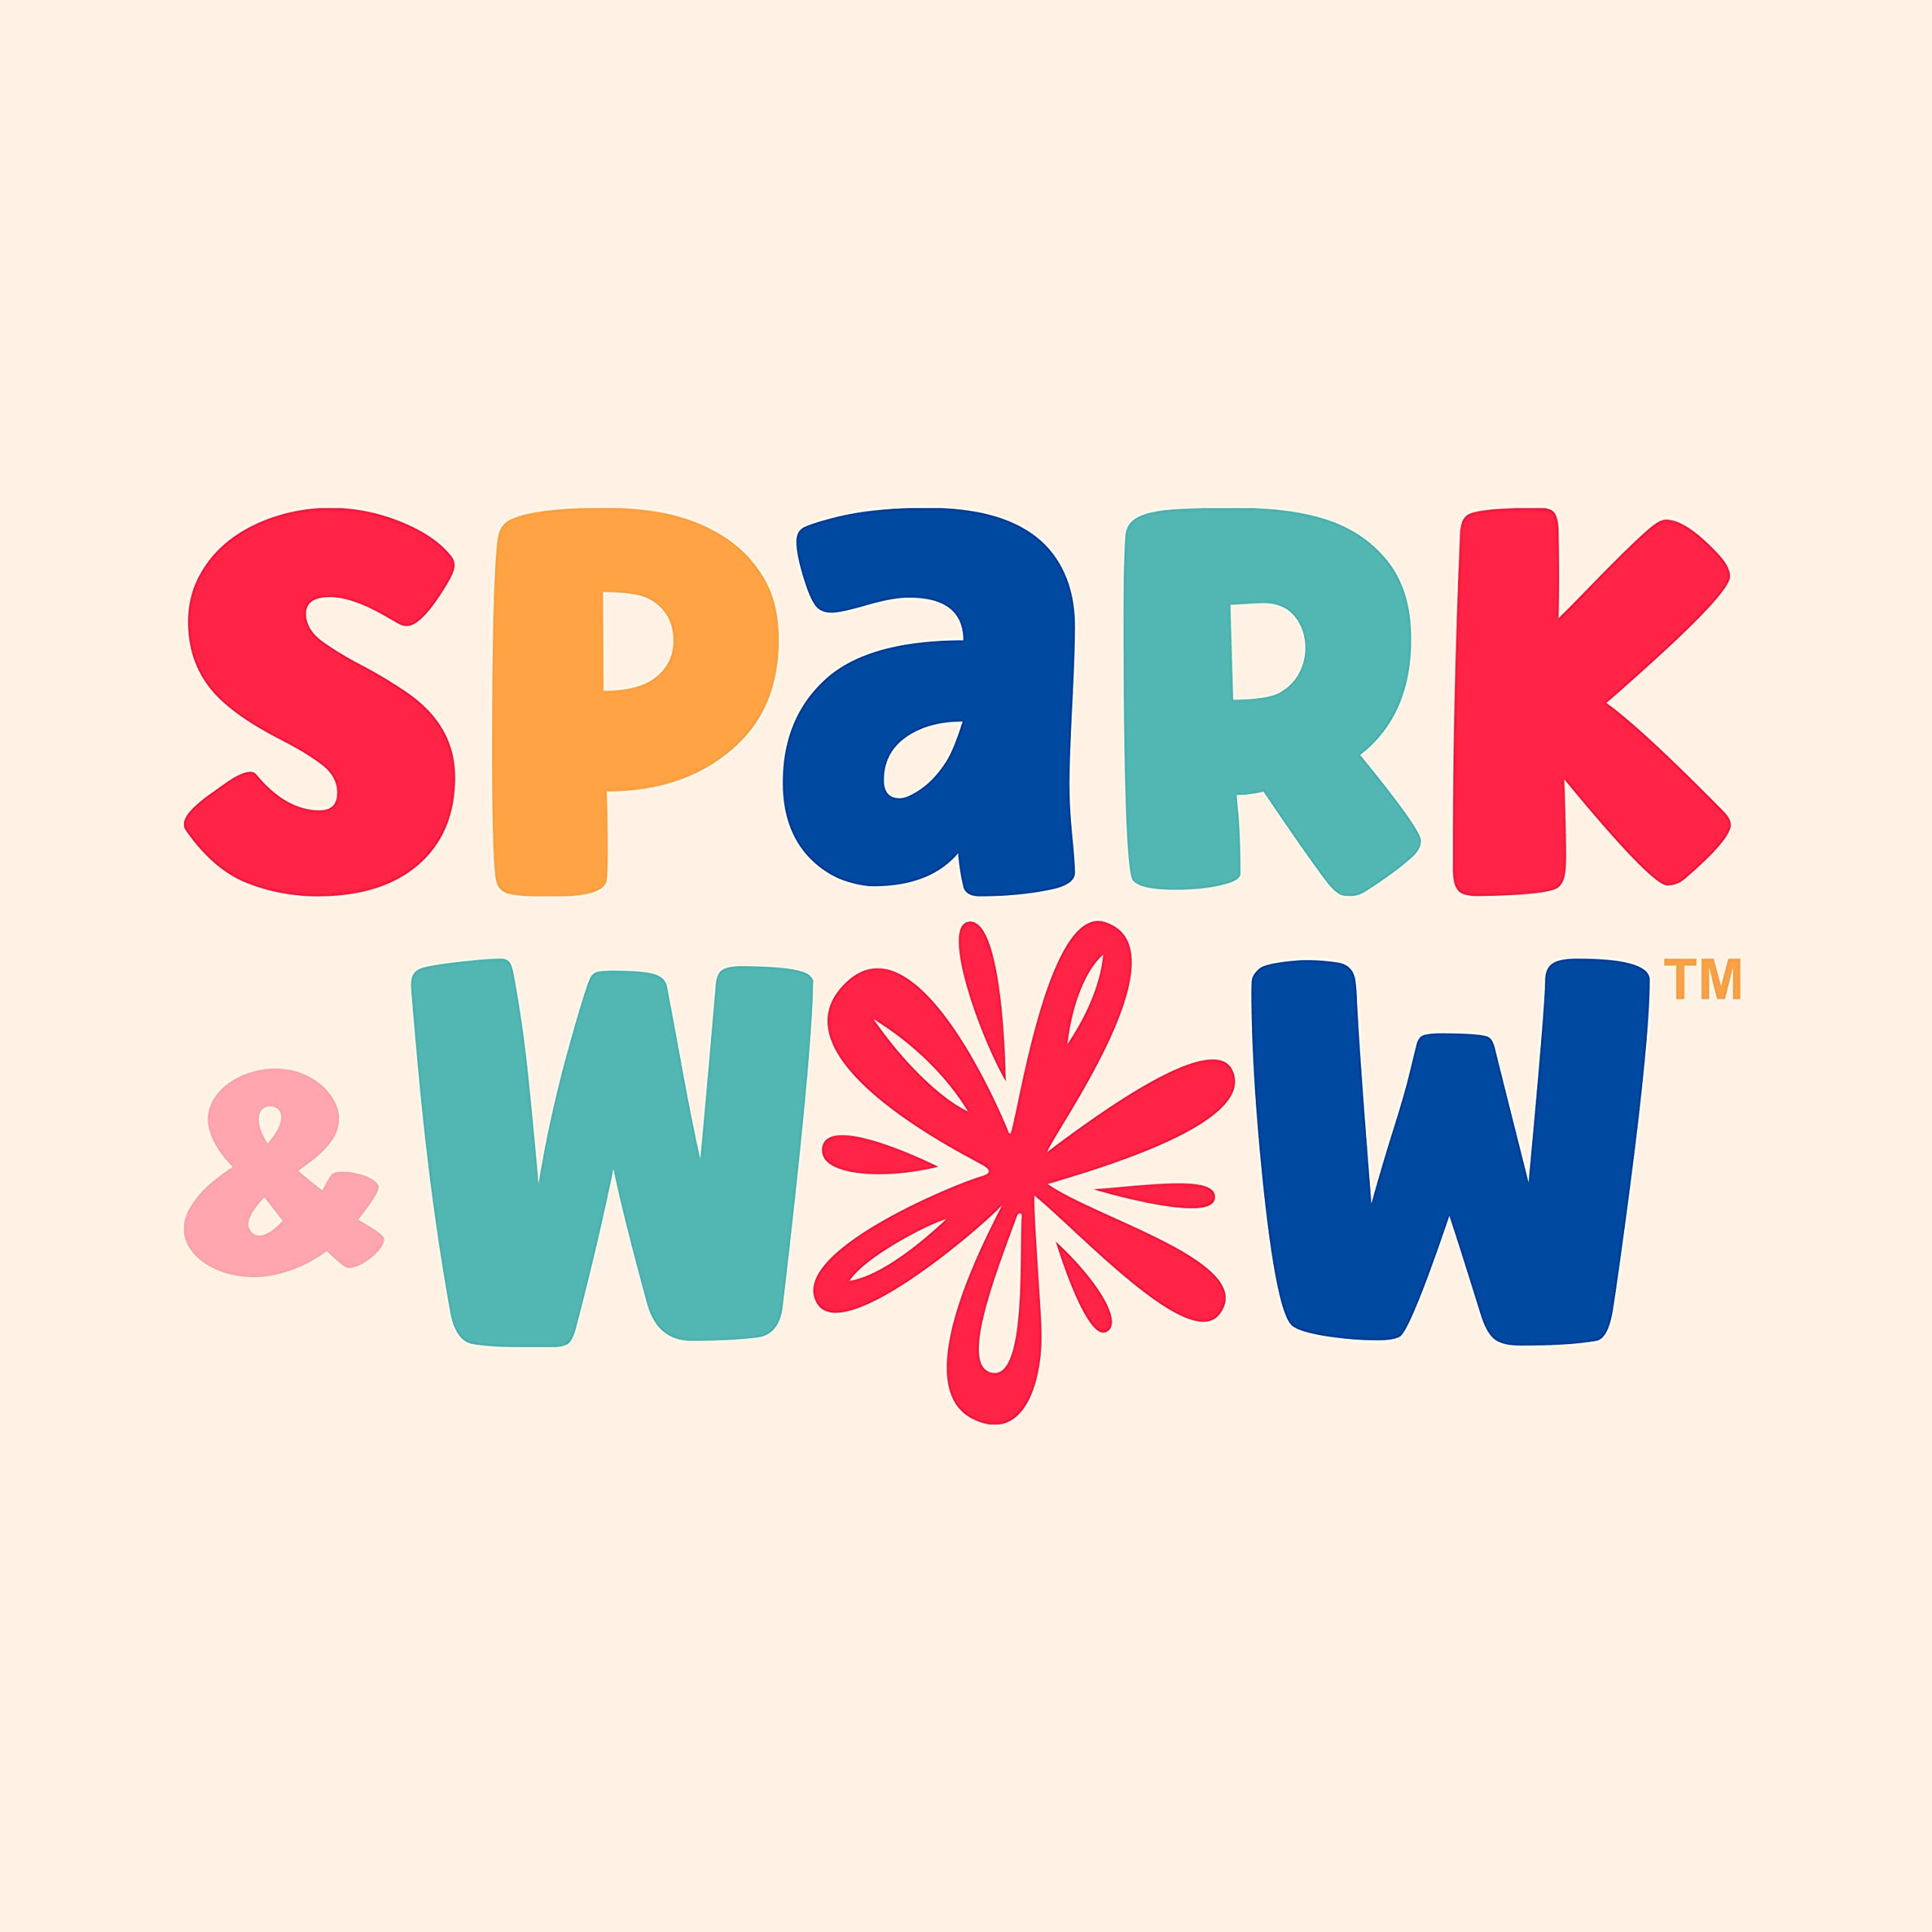 SPARK & WOW Swap ‘n’ Spin Gear Grid - Ages 2+ - Translucent, Customizable Gear Grid - Gears Toys for Kids - 4 Colors - 2 Sizes - Make Spinning, Turning Combinations